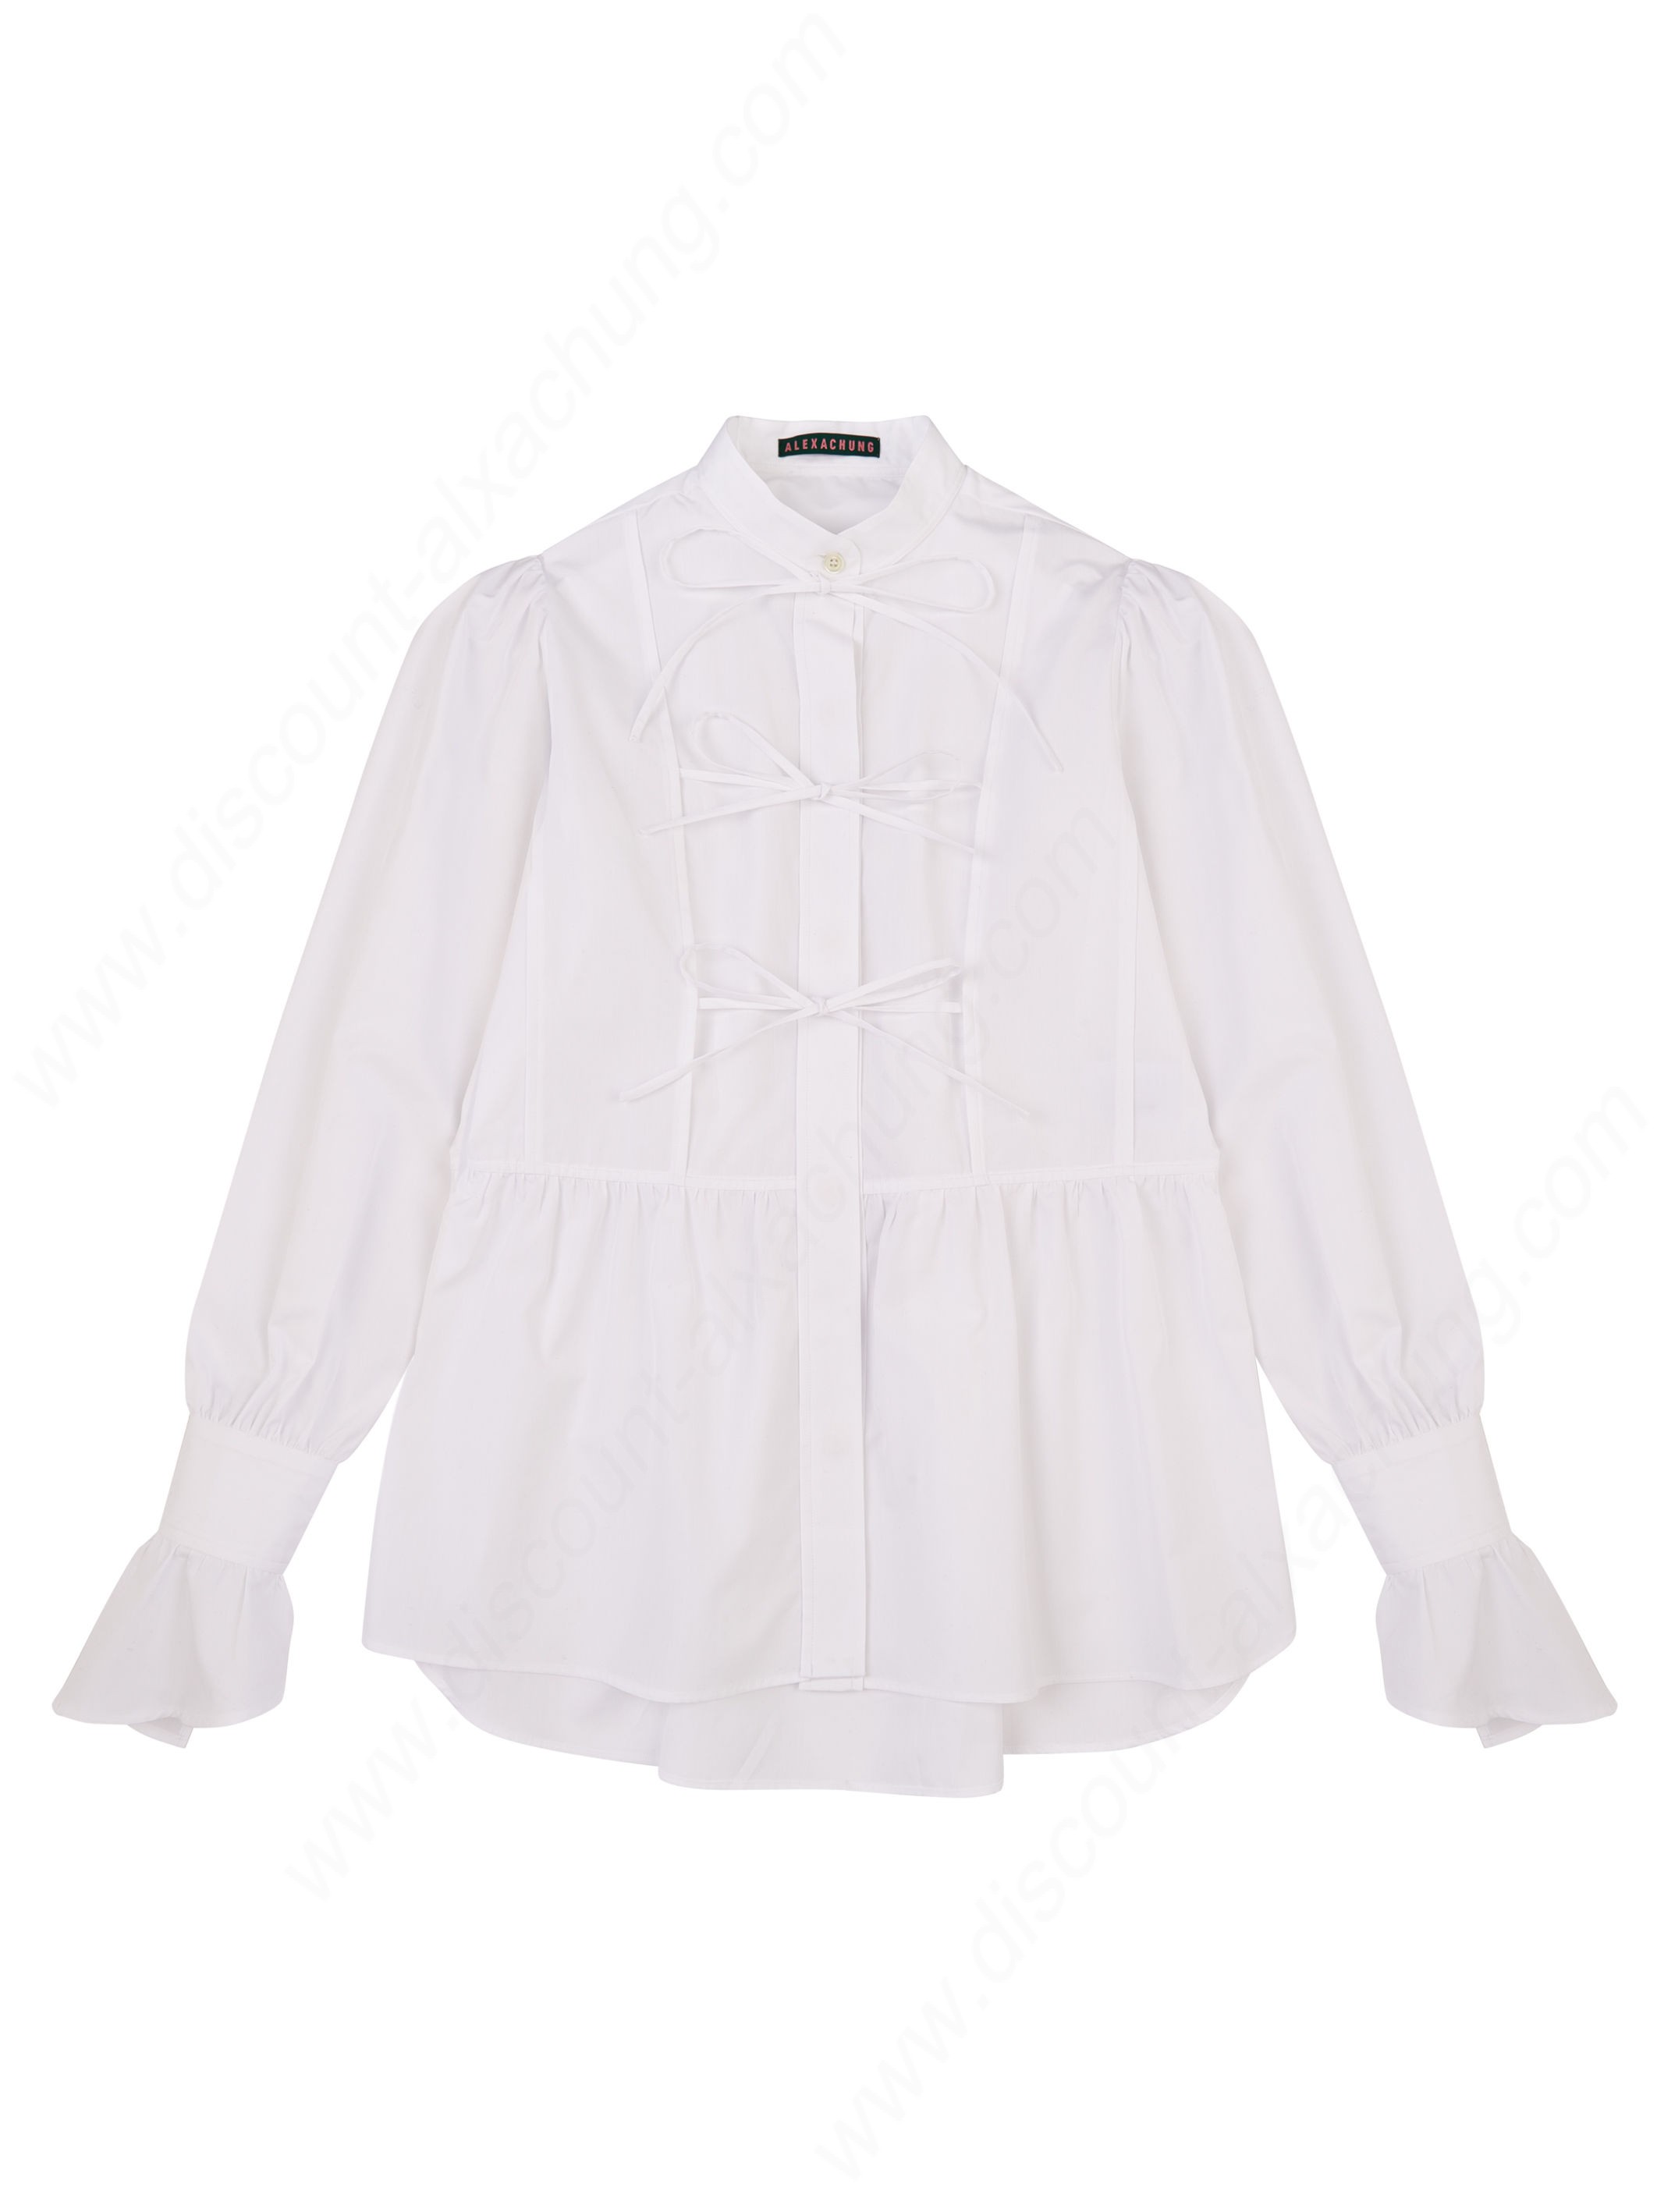 Alexachung Tie Front Bow Blouse - Alexachung Tie Front Bow Blouse